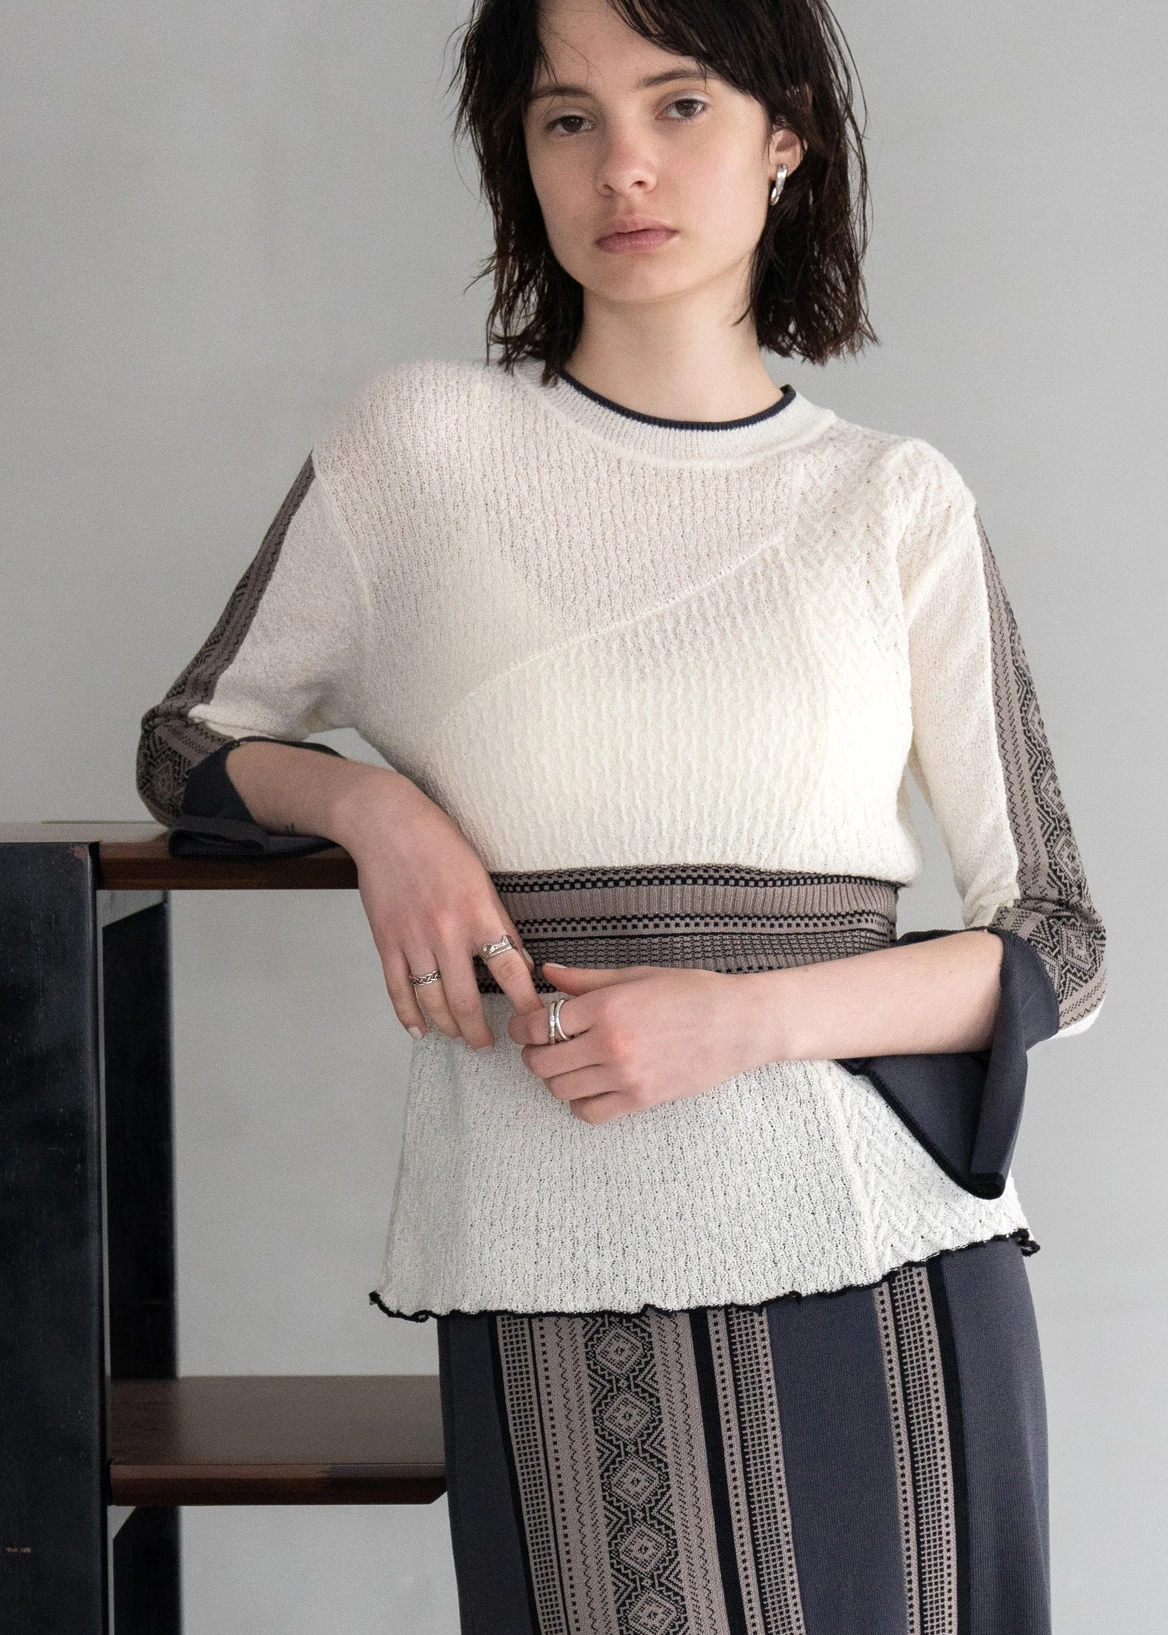 weave placement knit セットアップwillfully